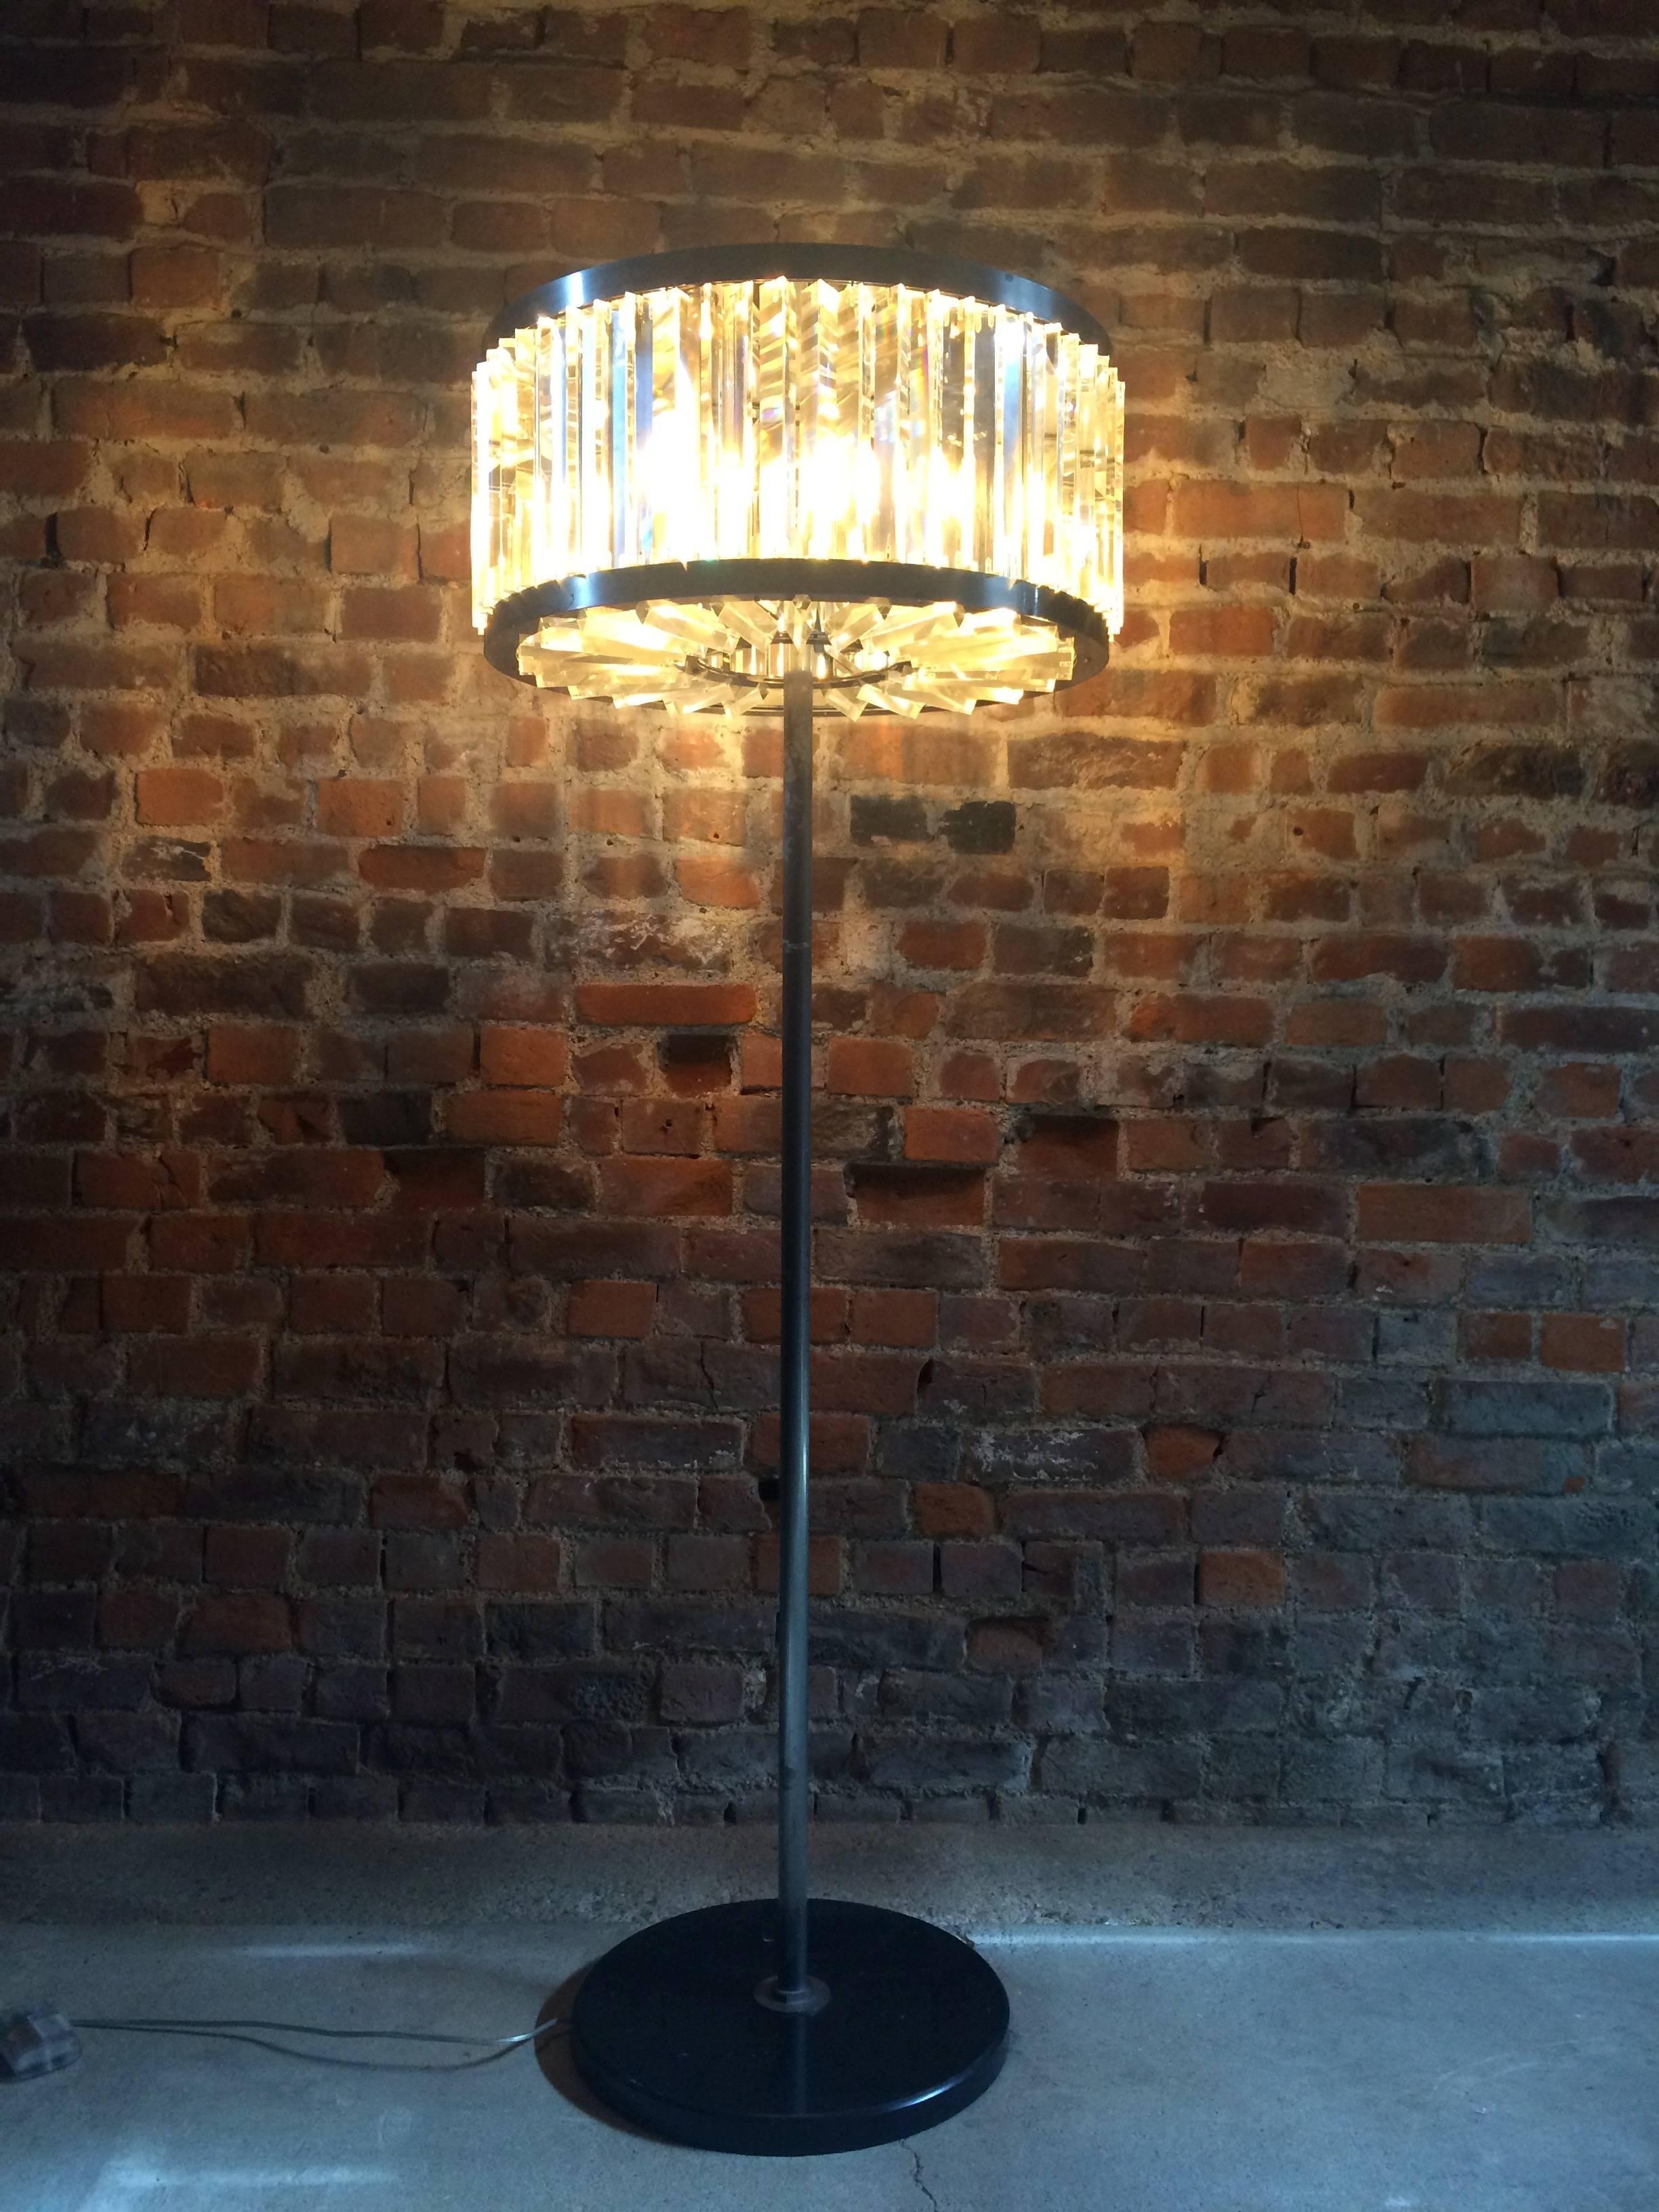 Timothy Oulton takes inspiration for his Rex floor lamp from the historic Rex Cinema, circa 1930s, England. This captivating luminary has an Art Deco aesthetic brought current with contemporary nuances. Its ‘shade’ is handcrafted from prismatic